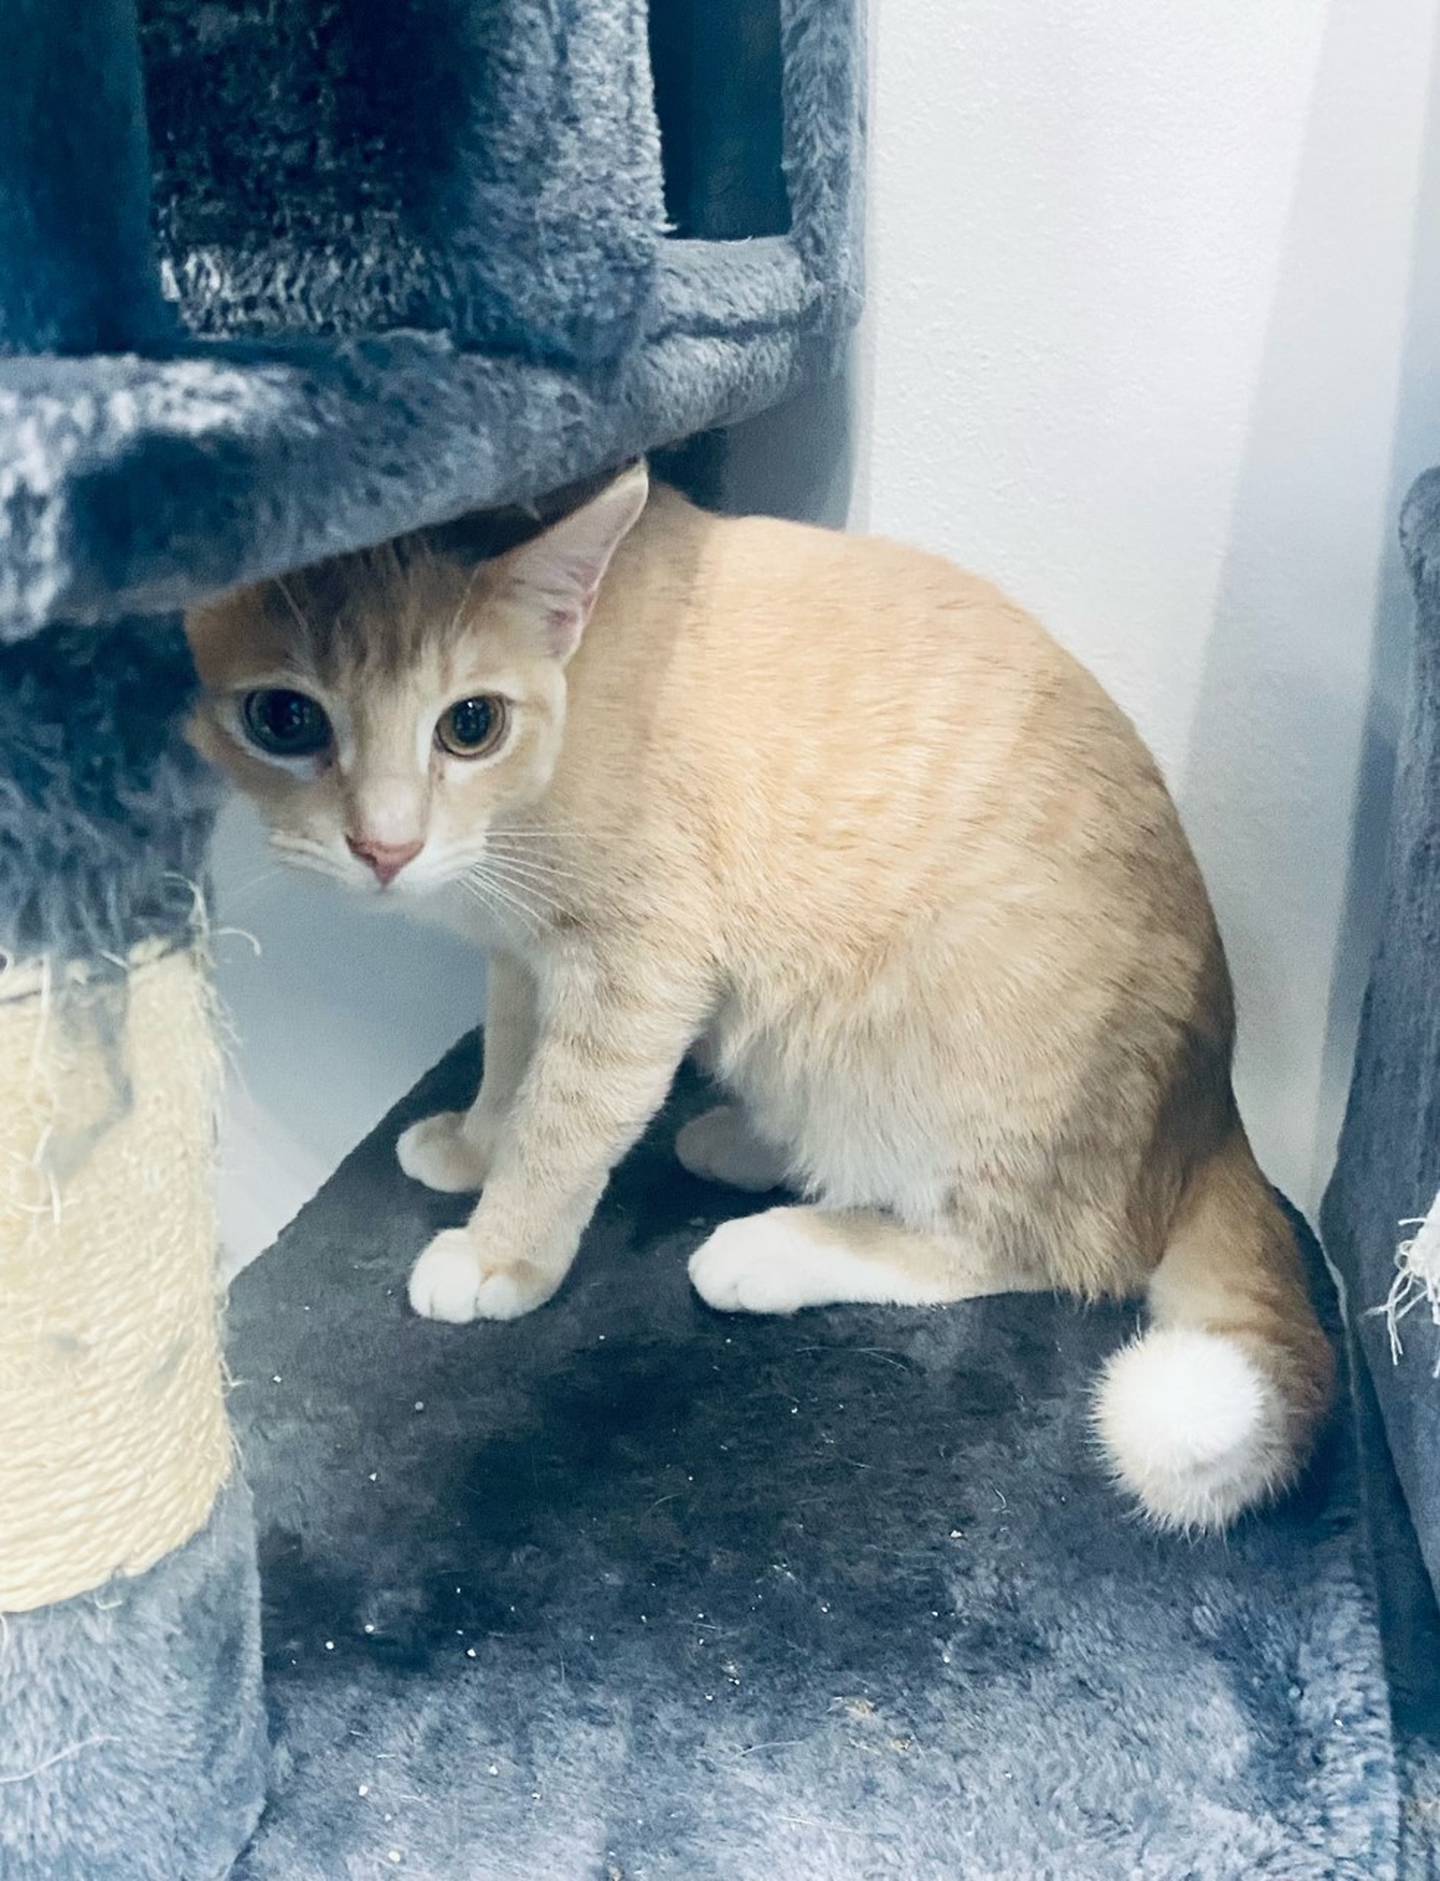 Taffy is a 6-month-old domestic shorthair. She is loving, friendly, and affectionate. Taffy is very sweet and immediately greets people. For more information on Taffy, contact Forepaws at megan@forepawspets.com. Visit https://www.forepawspets.com/.